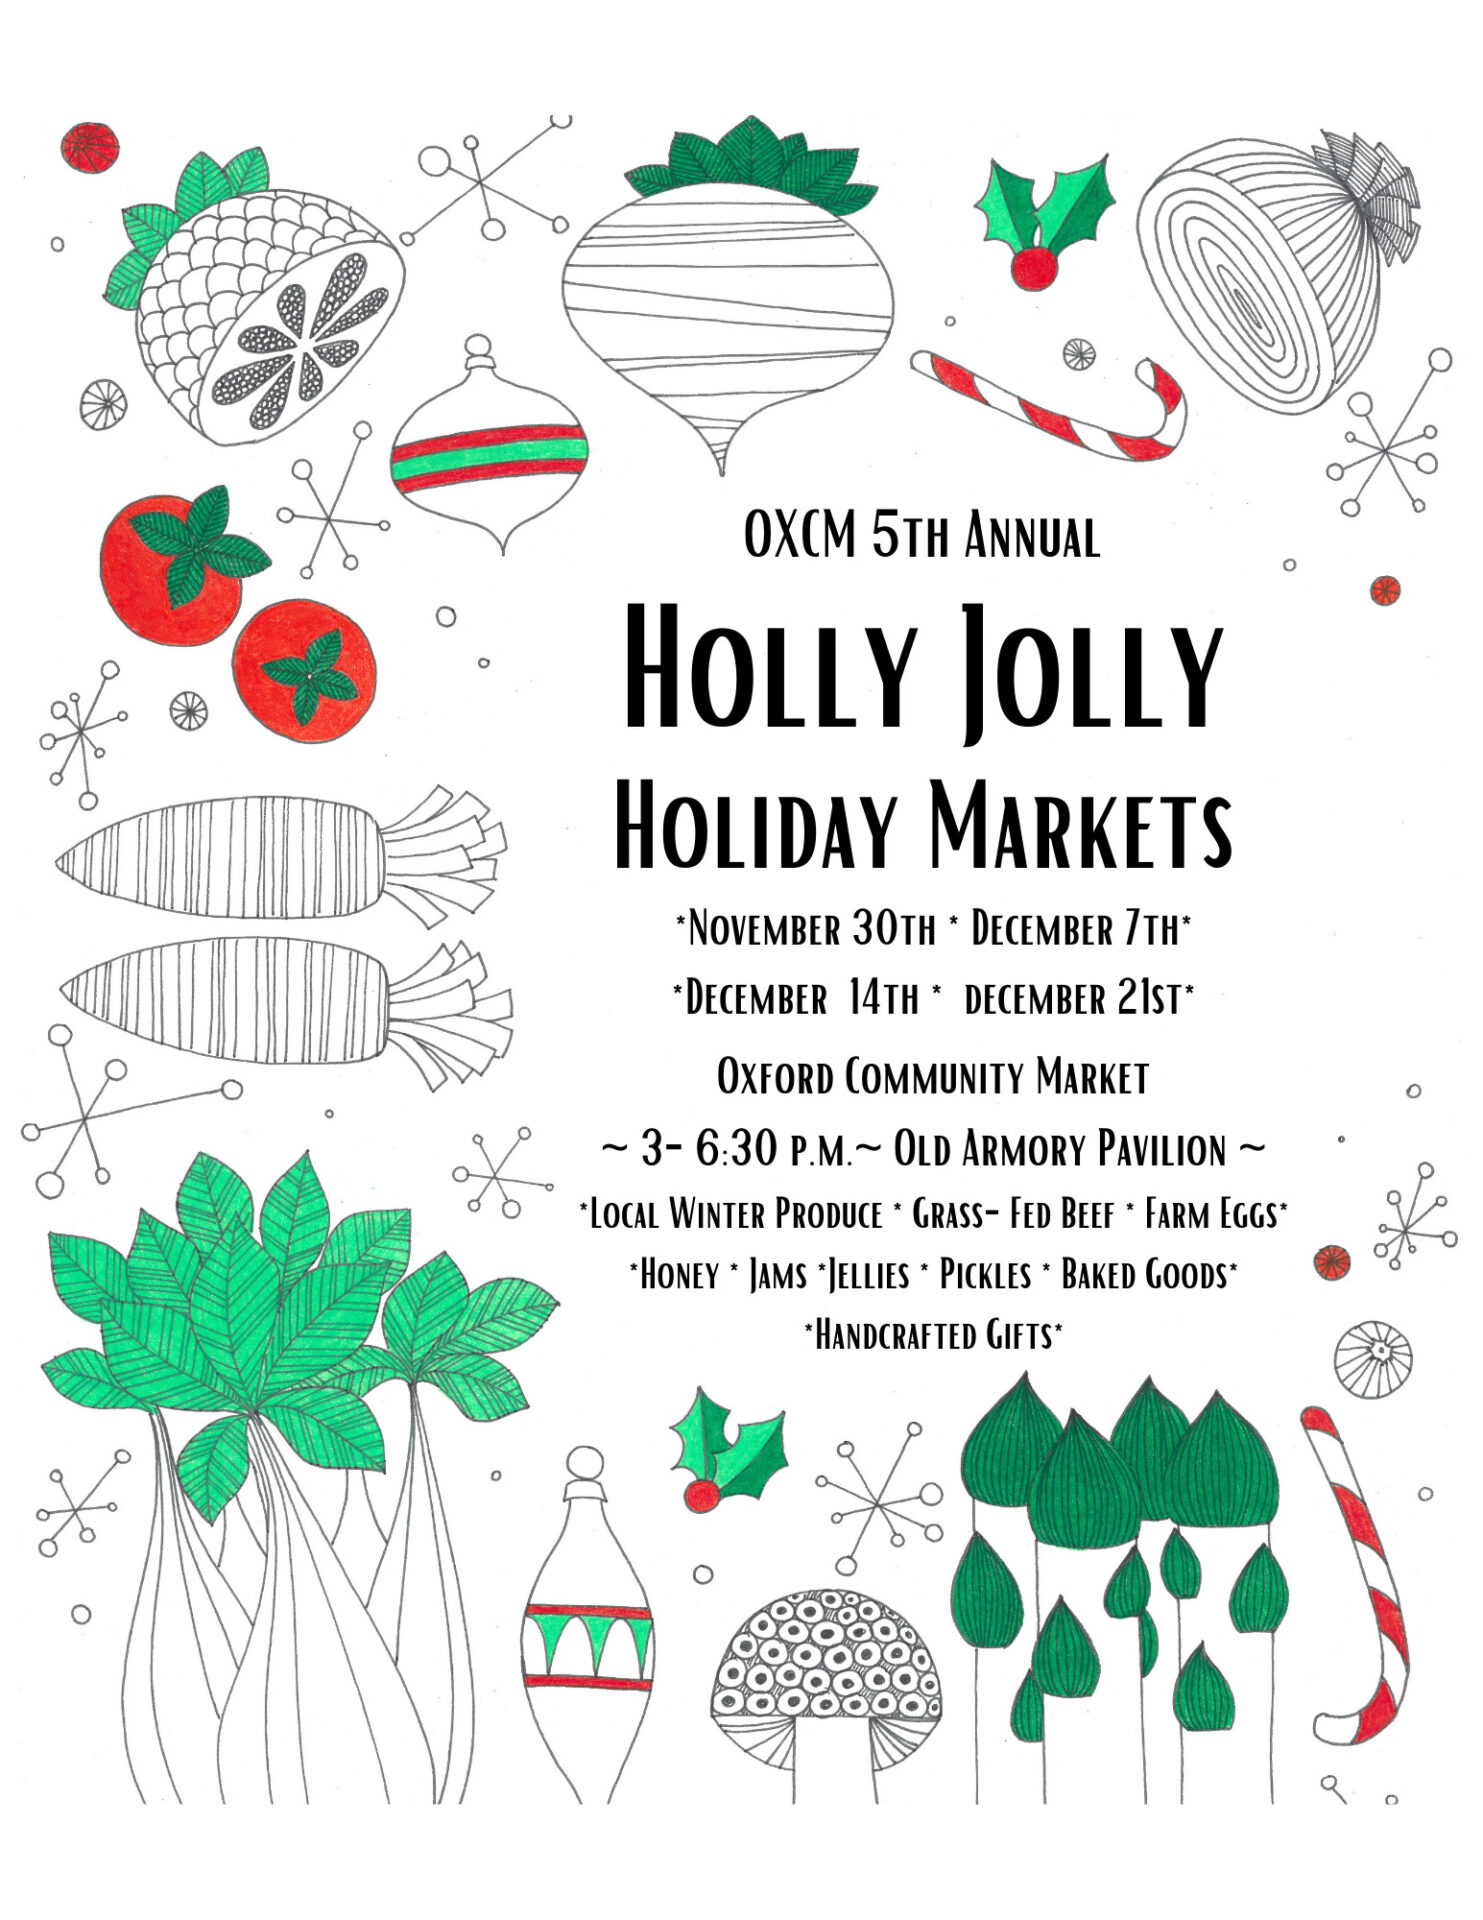 Oxford Community Market Hosts 5th Annual Holly Jolly Holiday